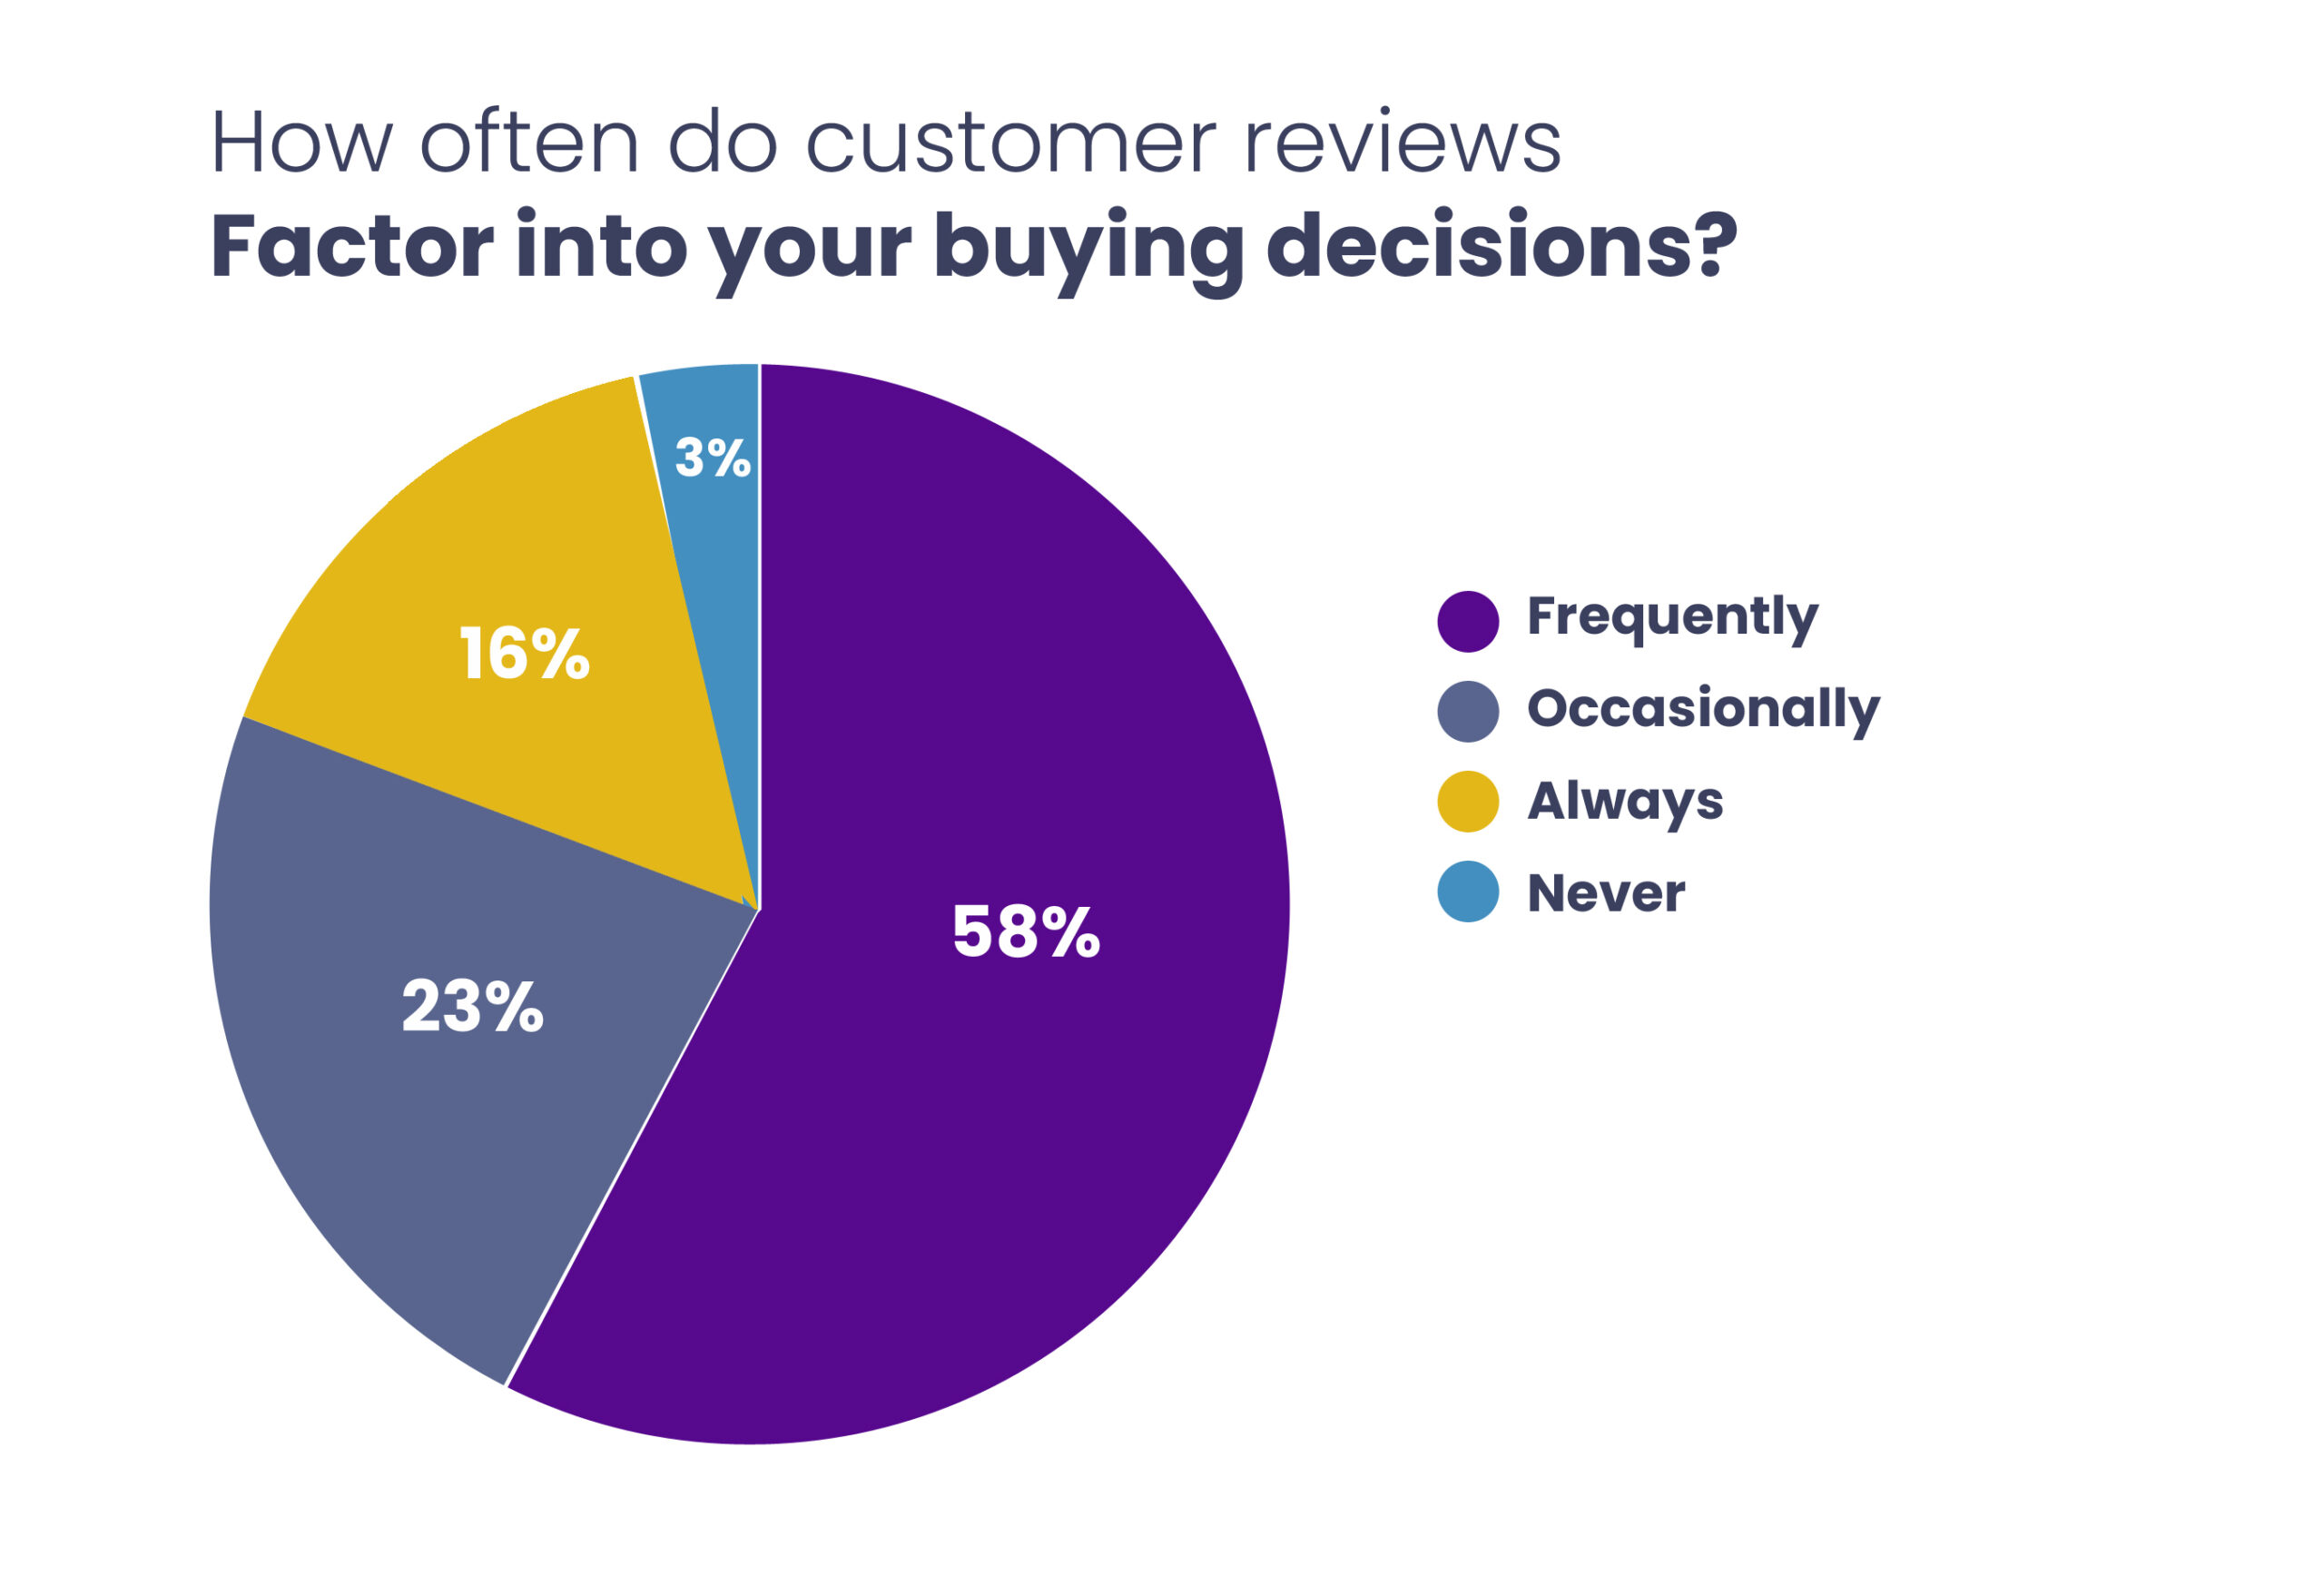 Customer Reviews and Buying Decisions